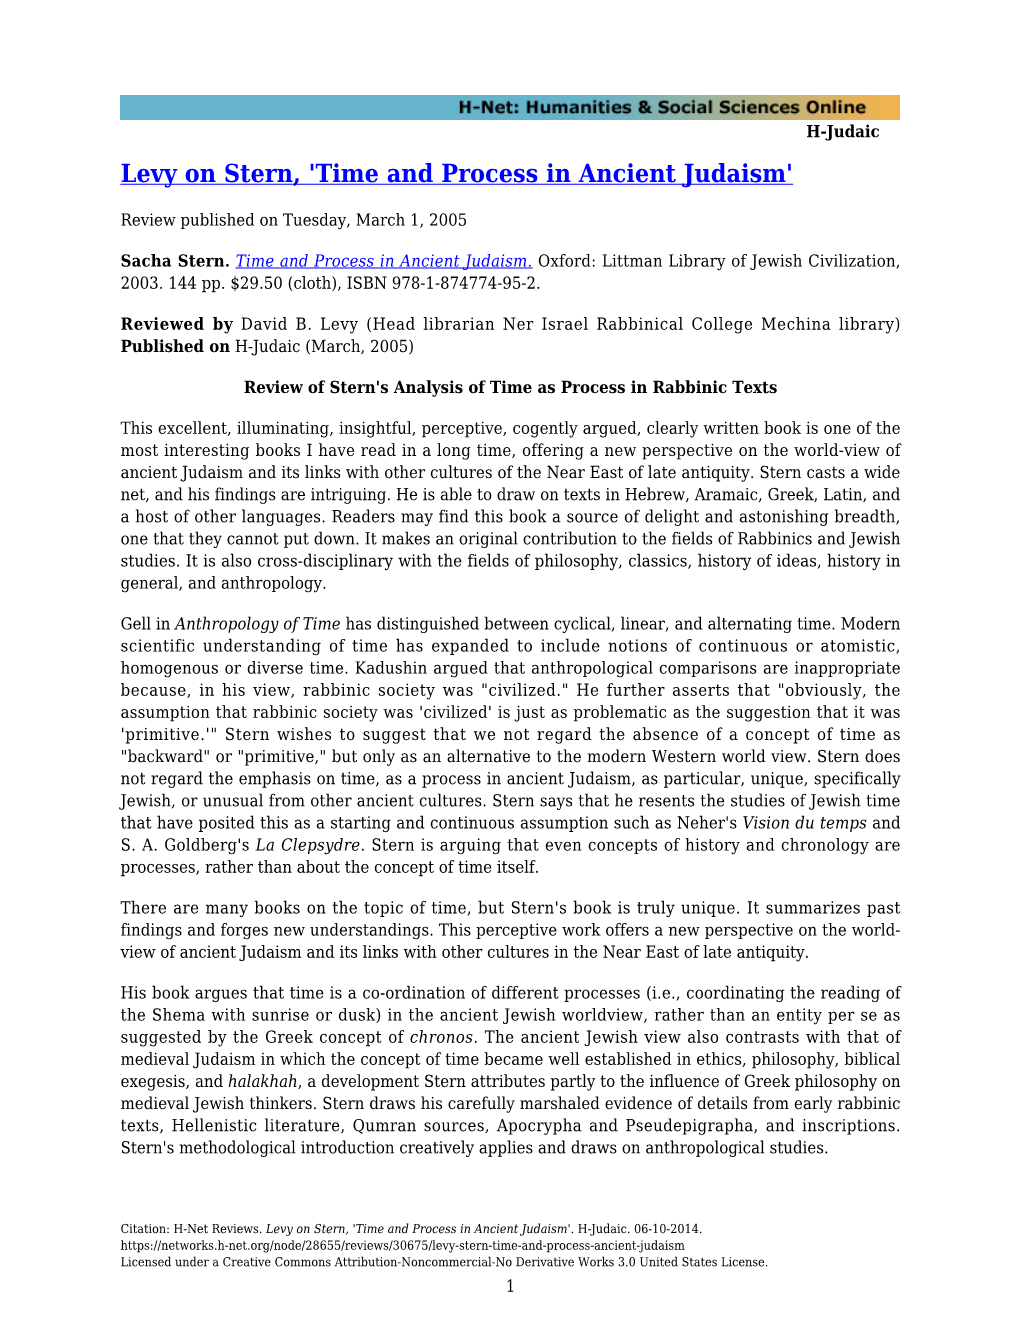 Time and Process in Ancient Judaism'